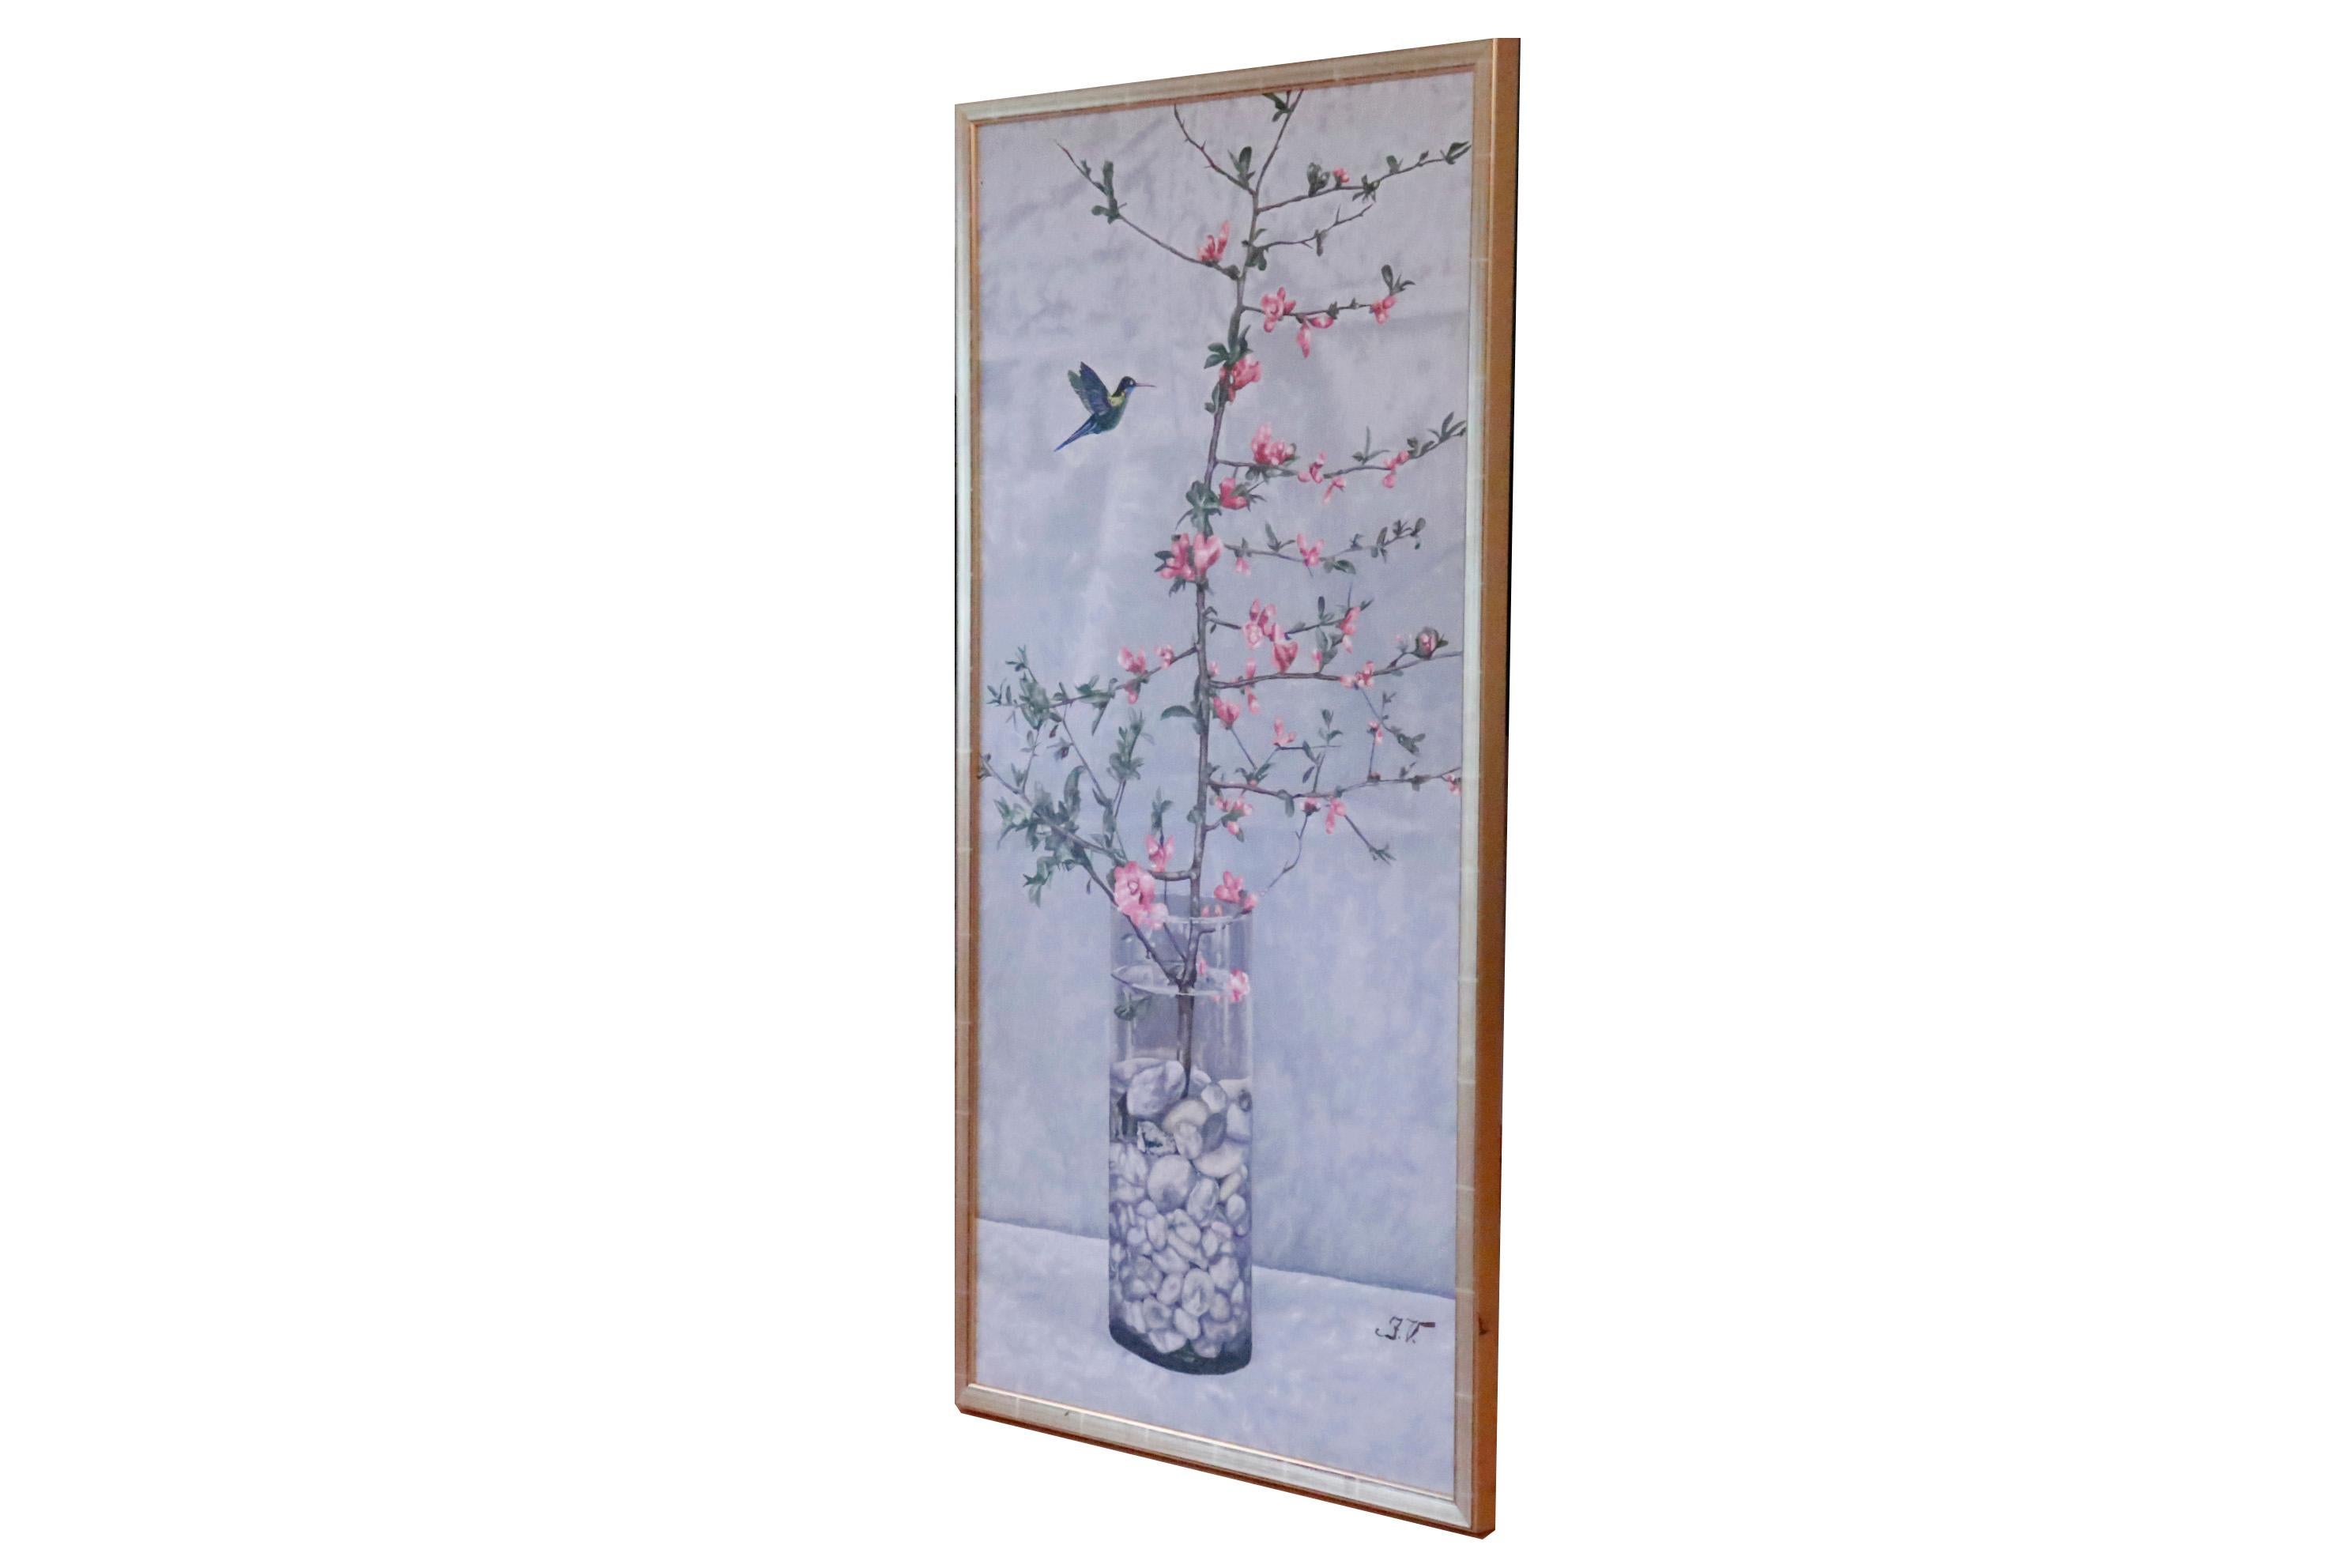 A contemporary acrylic on canvas. A cherry blossom branch in a tall vase filled with pebbles is set against a gray background. A hummingbird mid flight can be seen to the left. Initialed by the artist in the lower right corner. Signed and dated in